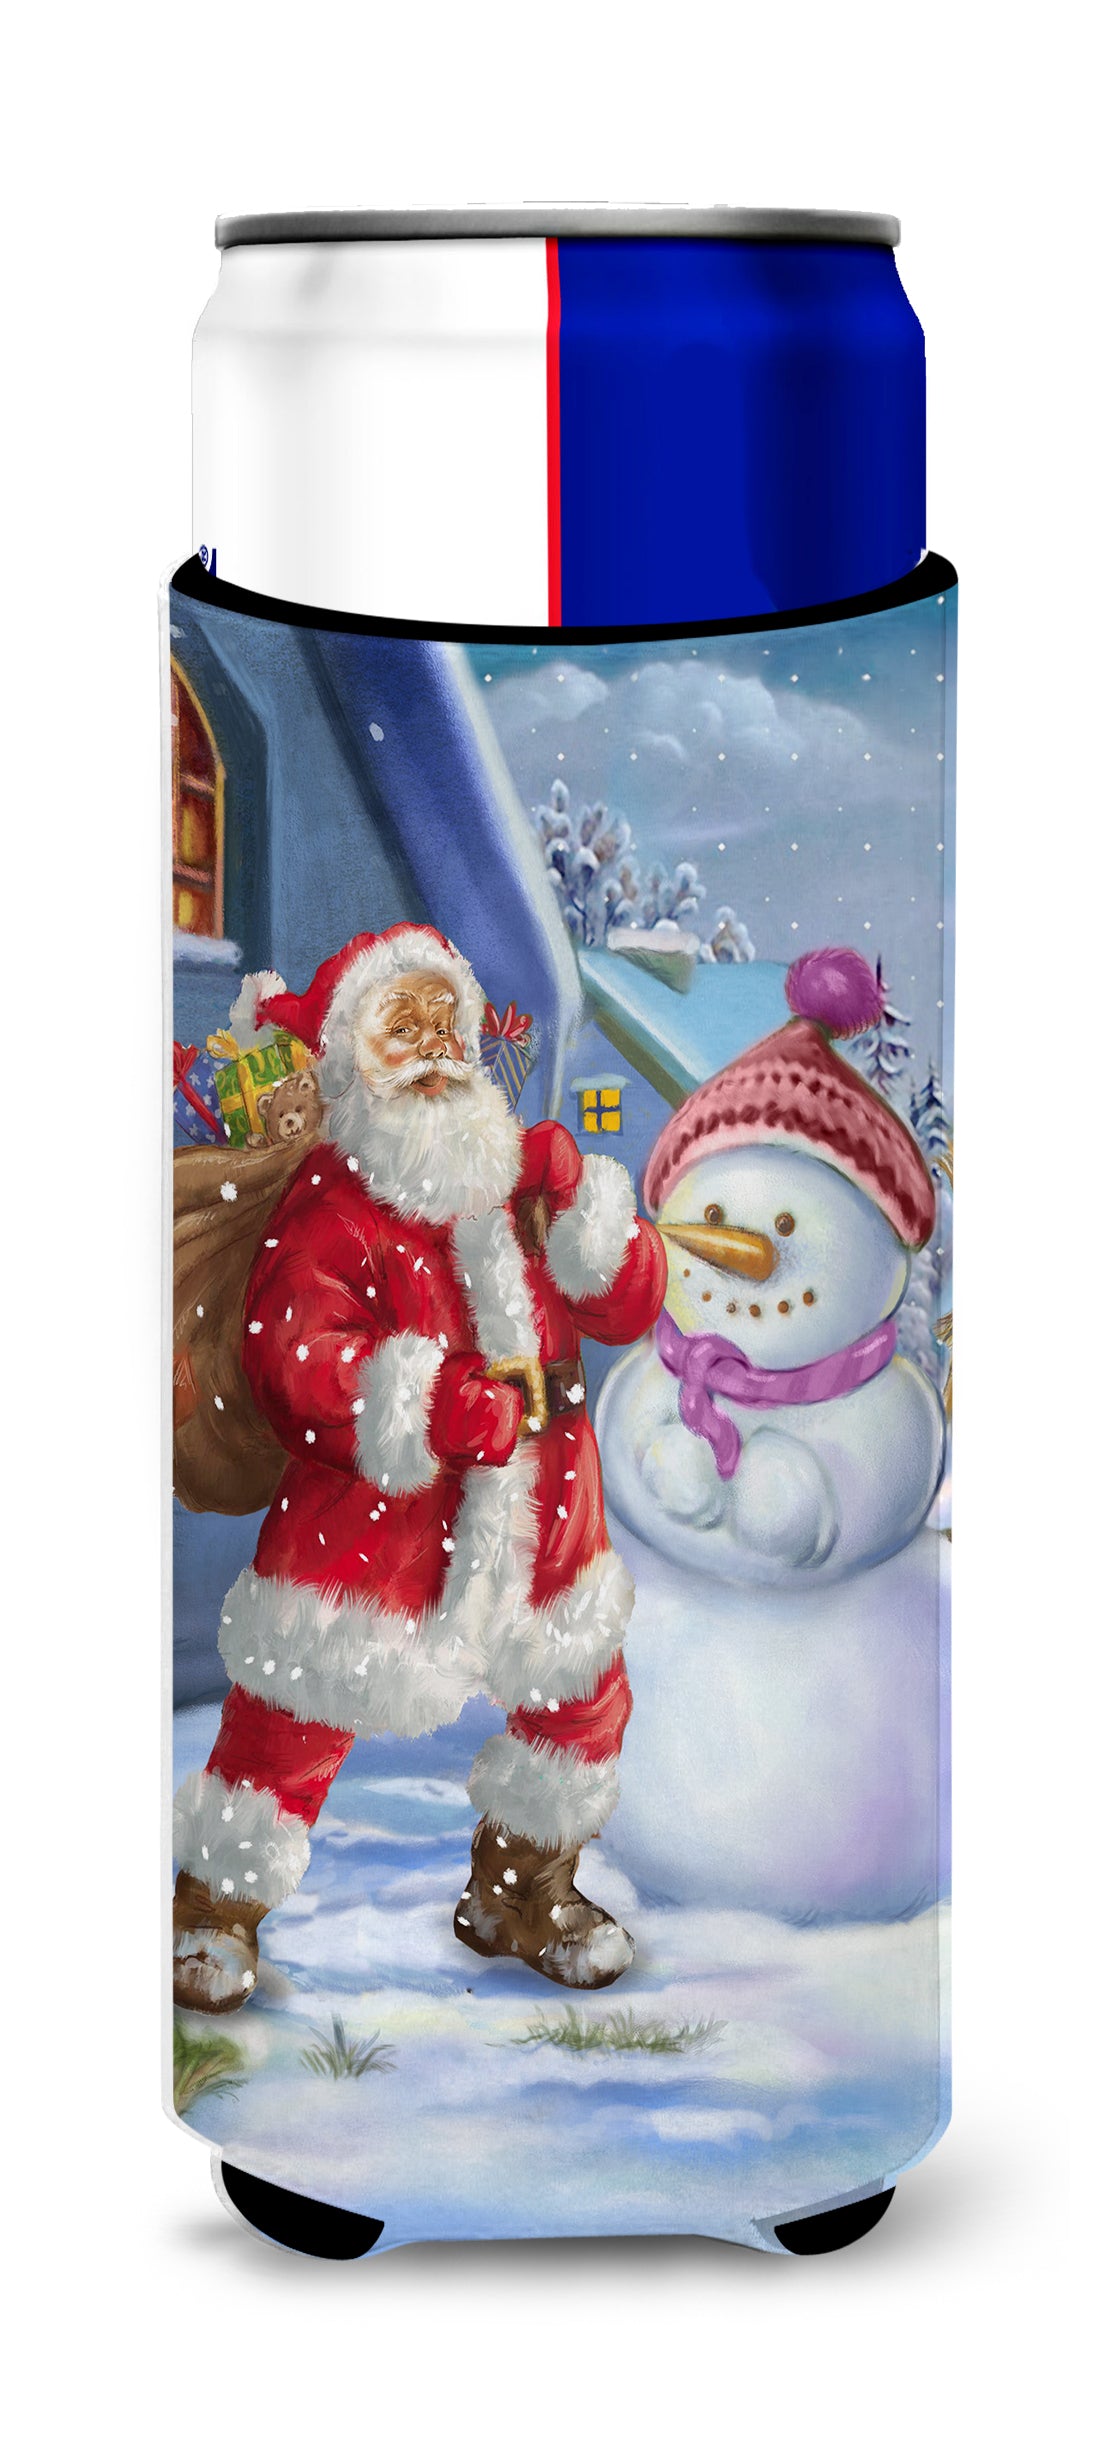 Christmas Santa Claus and Snowman Ultra Beverage Insulators for slim cans APH6200MUK